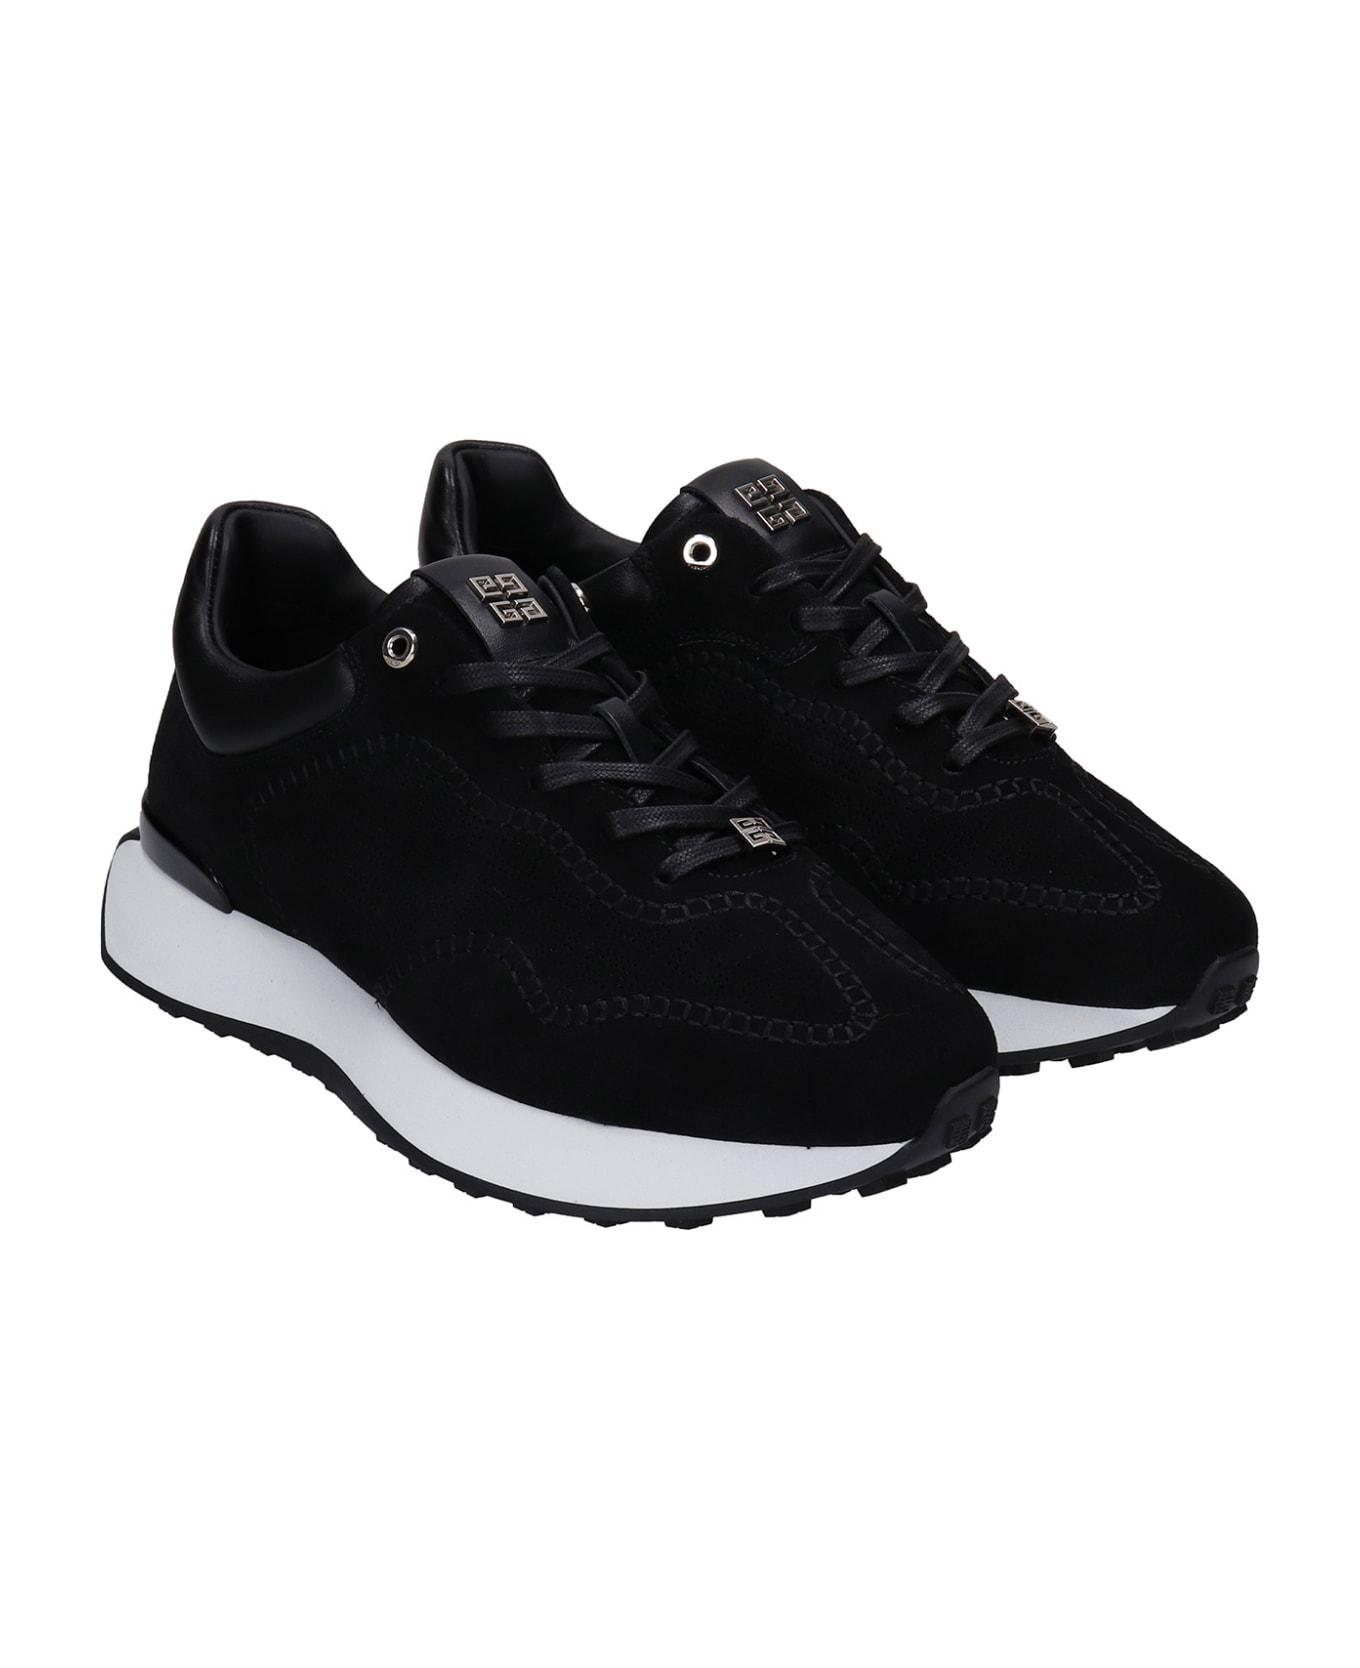 Givenchy Giv Runner Sneakers In Black Leather - black